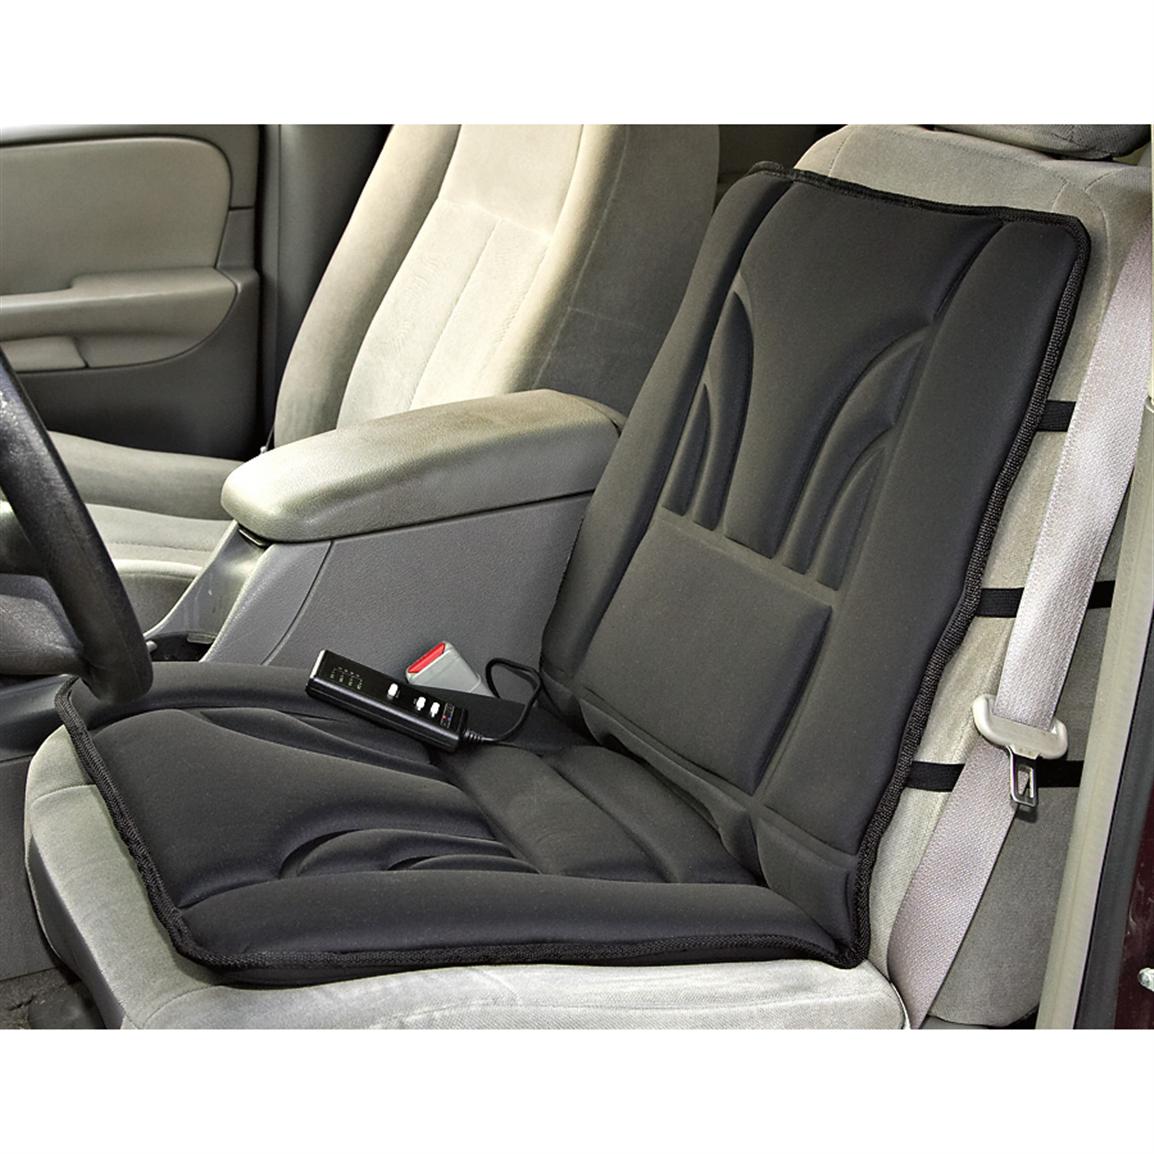 Car and Driver® Massage Seat Cushion - 153380, Accessories at Sportsman